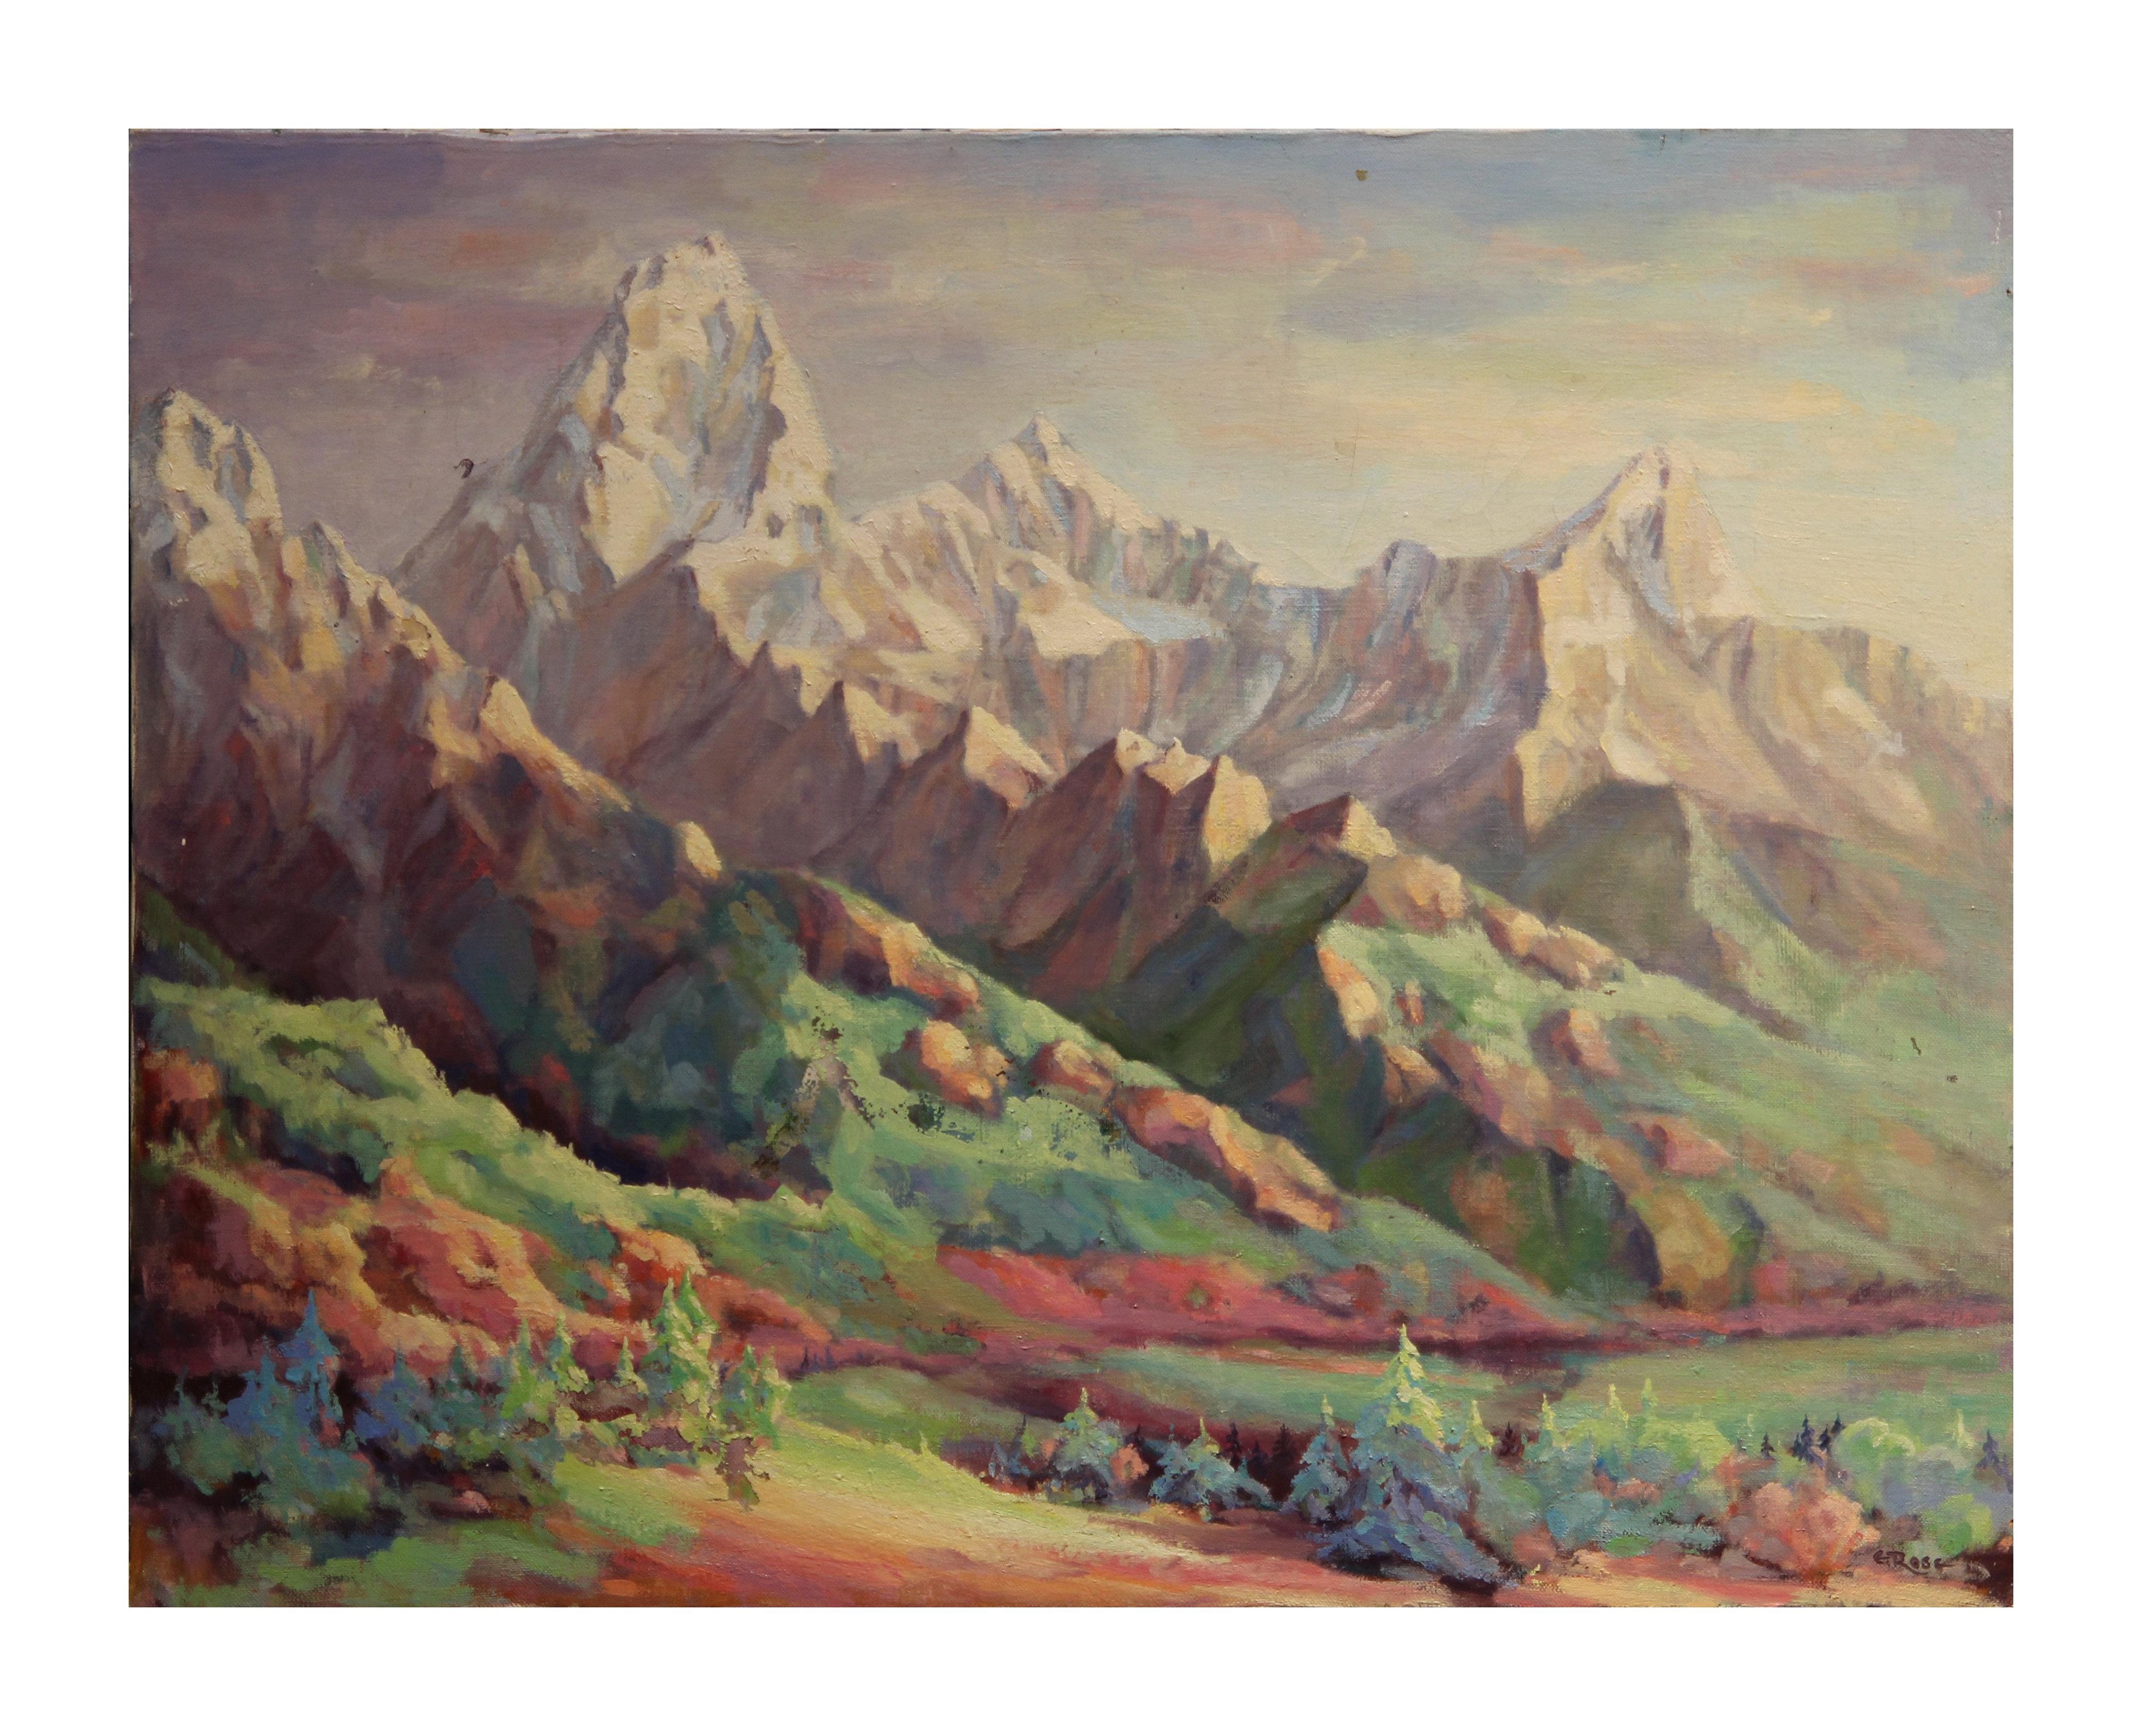 Elsa Rose Abstract Painting - "Early Morning in the Tetons" Pastoral Wyoming Landscape Painting